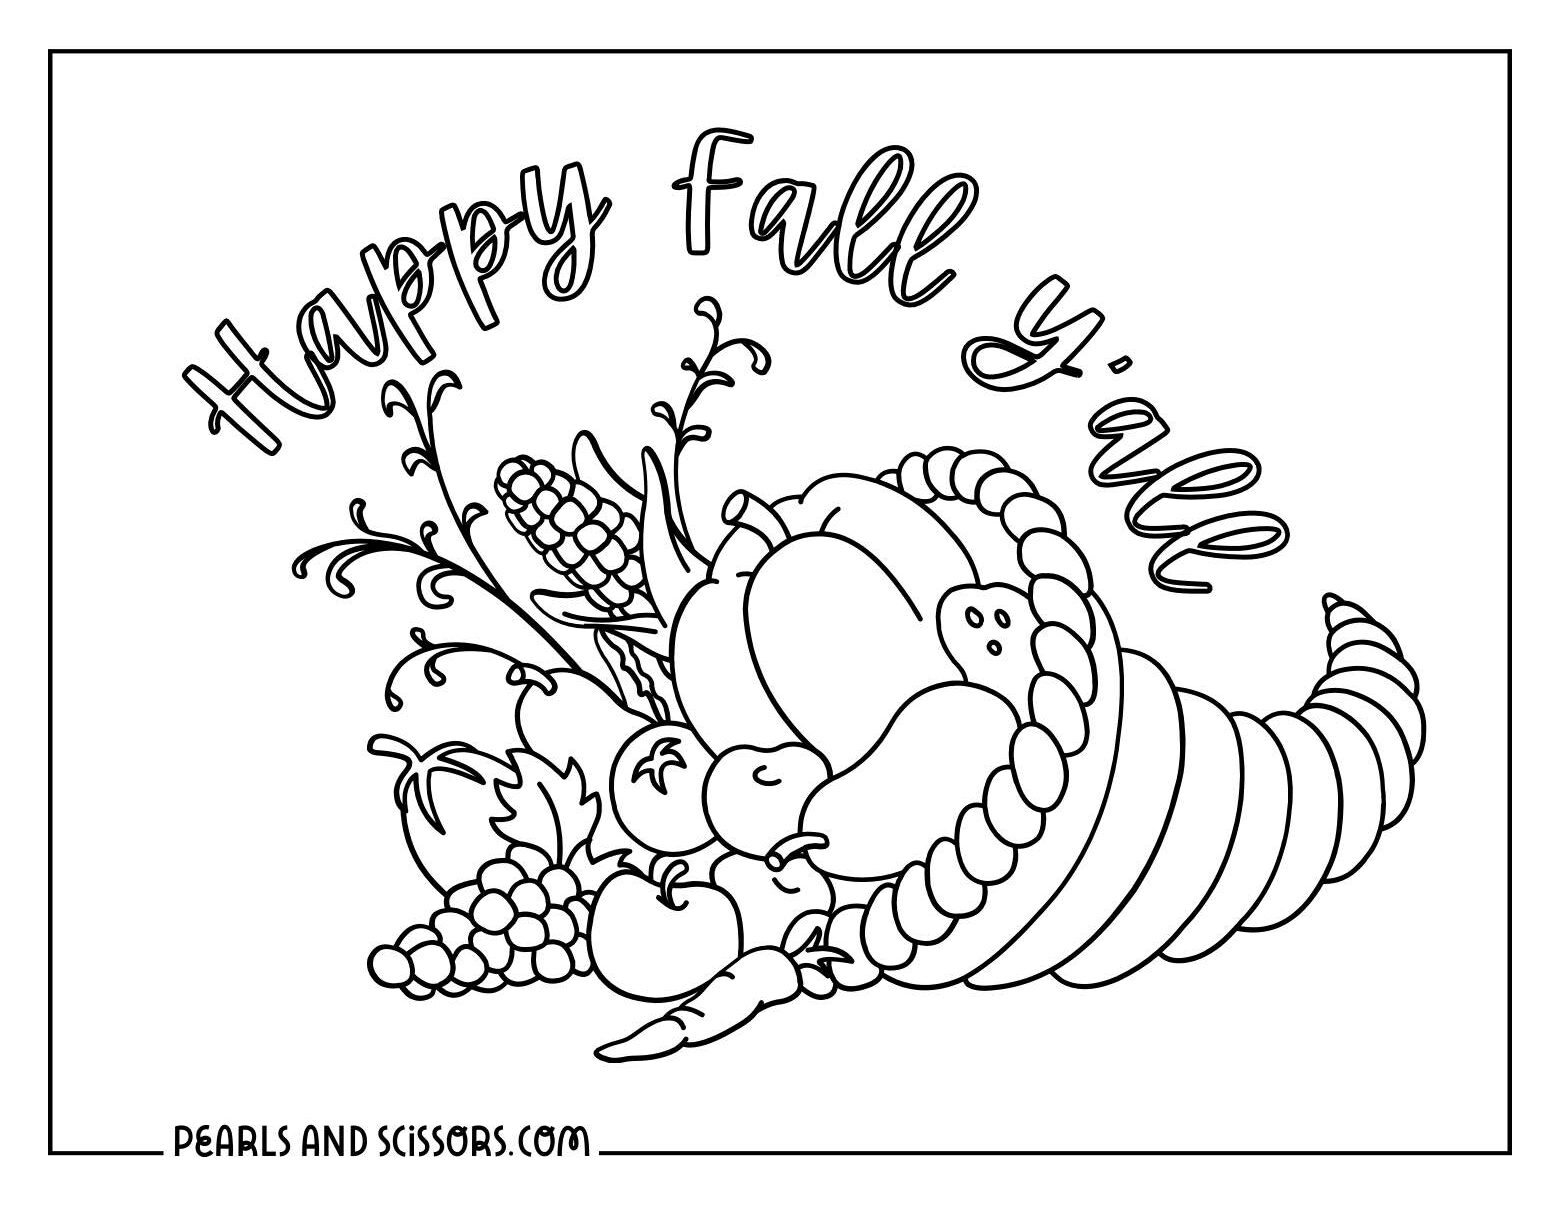 Thanksgiving cornucopia coloring page for adults.